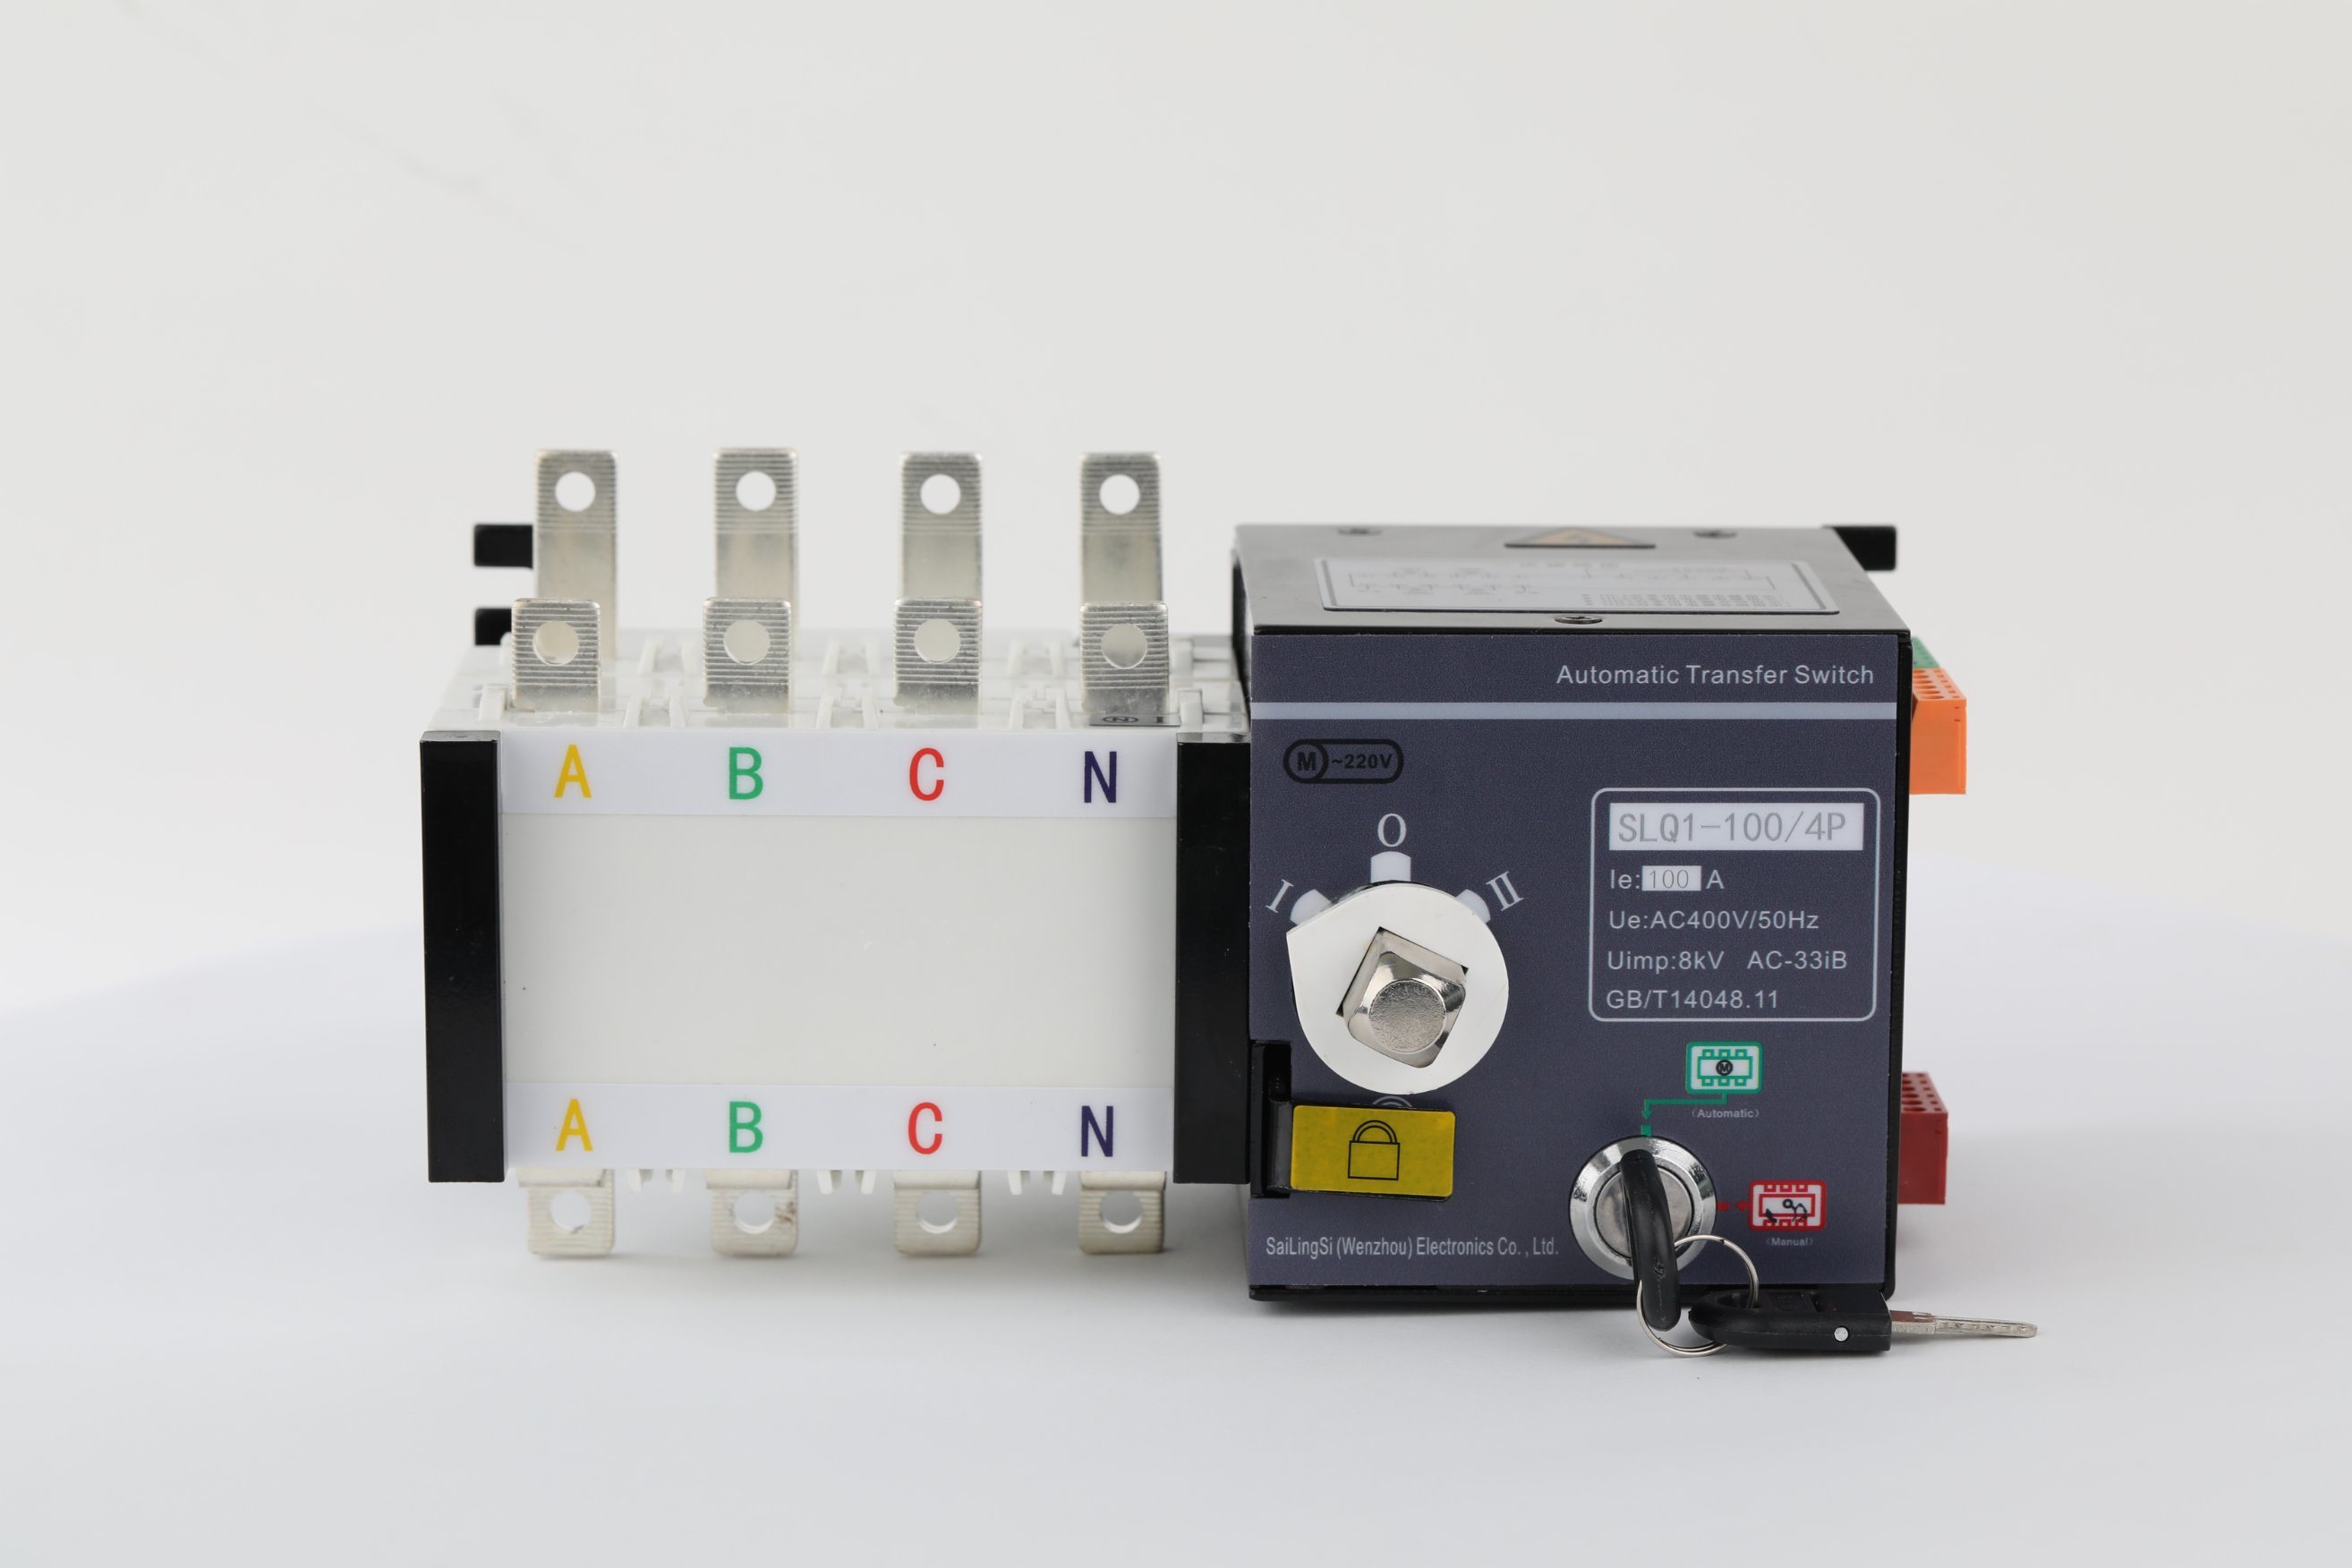 Uvq1-1000A 3p ATS 400V 50Hz ATS Self Return Electric Automatic Transfer Switch with Fire Control